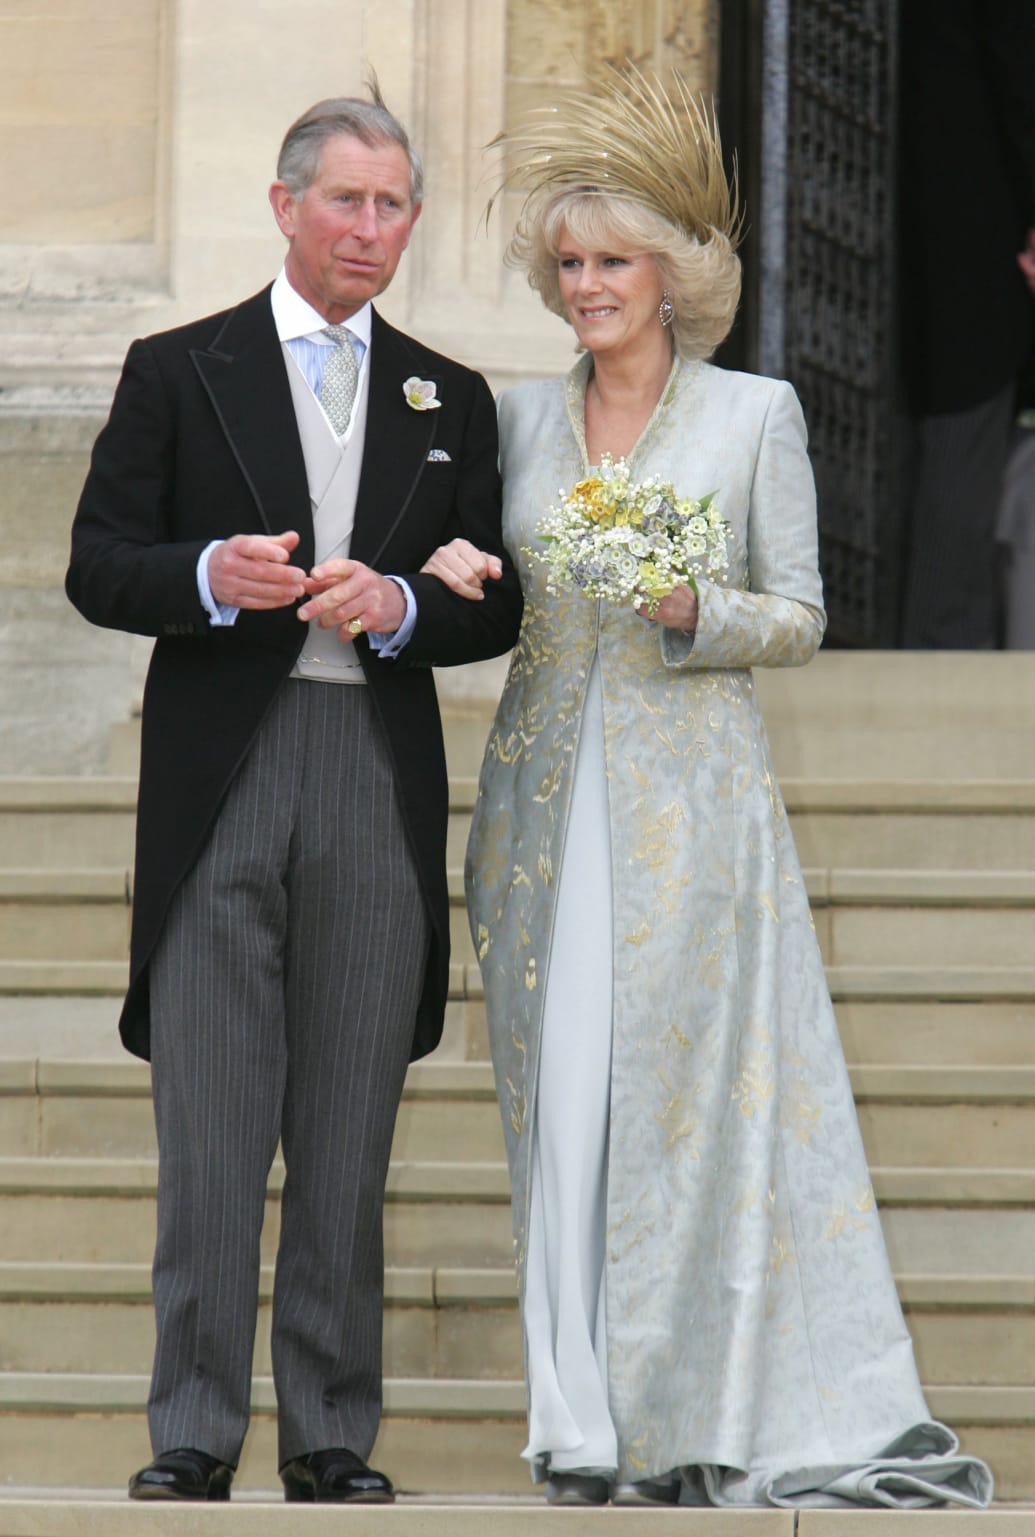 Prince Charles and Camilla, Duchess of Cornwall, pose in front of St. George's Chapel at Windsor Castle, after the prayer and dedication service following their wedding, April 9, 2005.